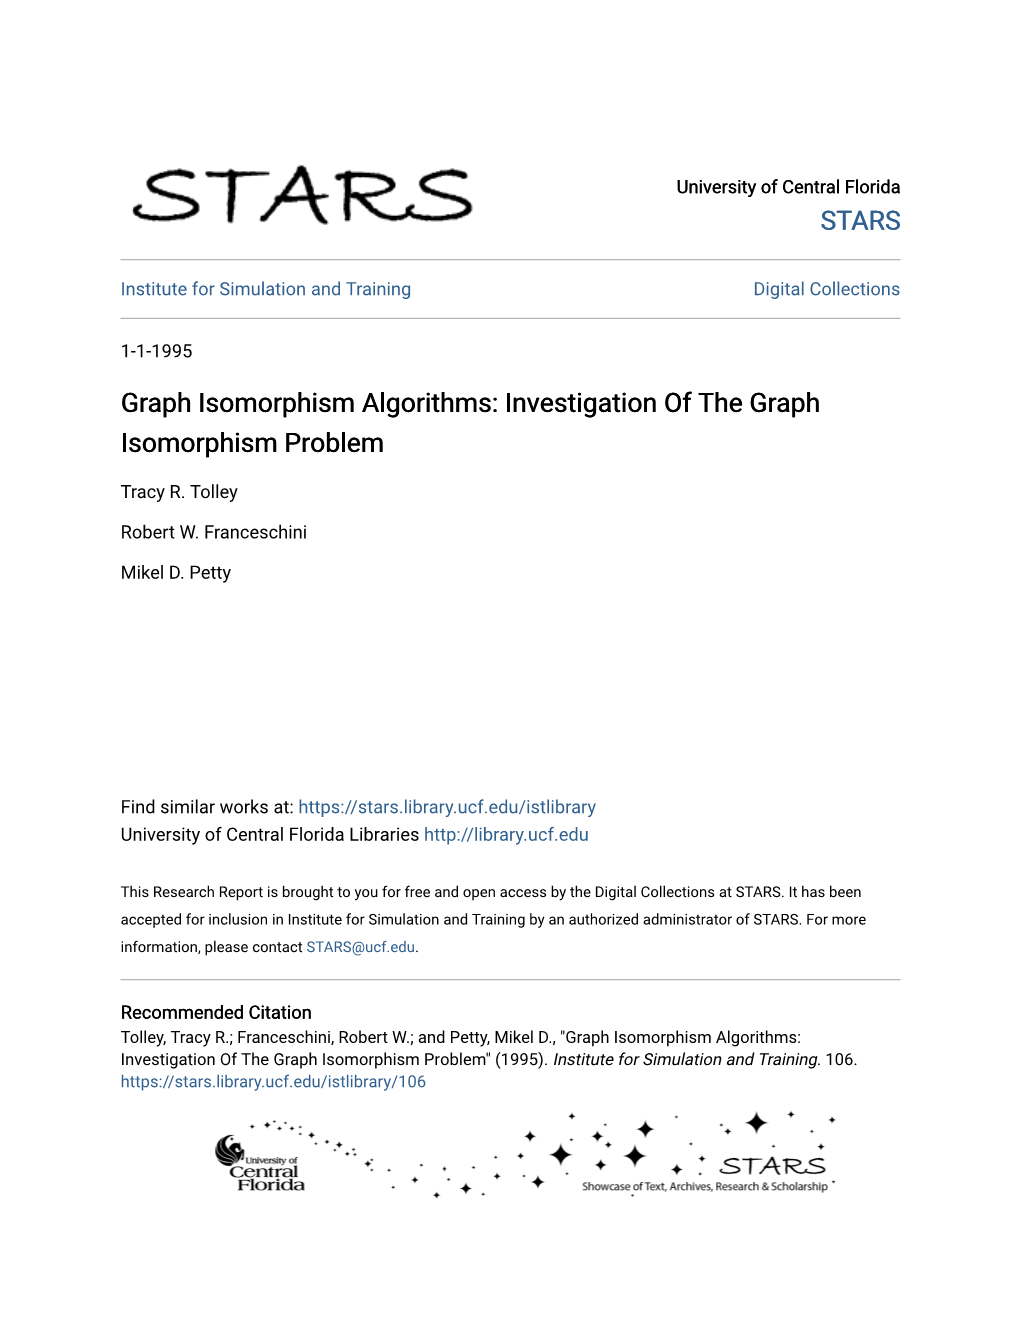 Investigation of the Graph Isomorphism Problem